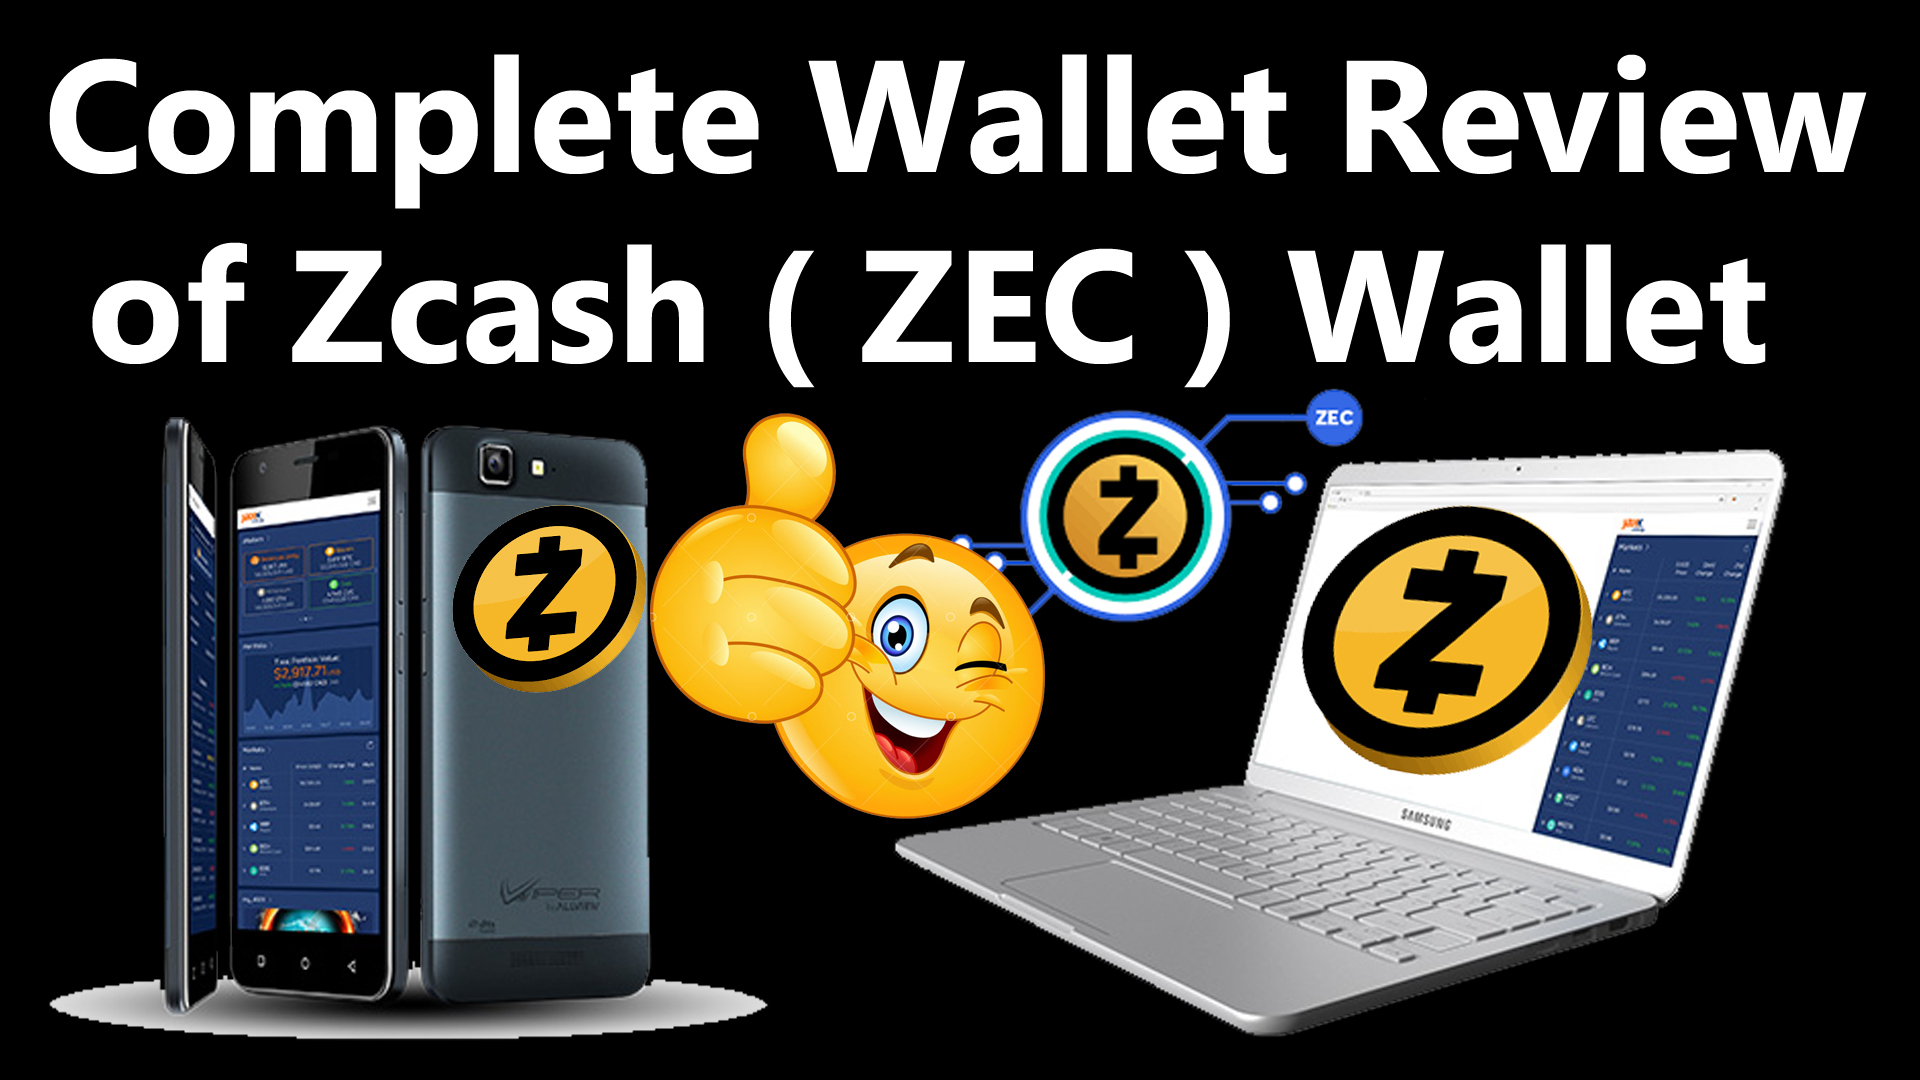 Complete Wallet Review of Zcash Wallet by Crypto Wallets Info.jpg